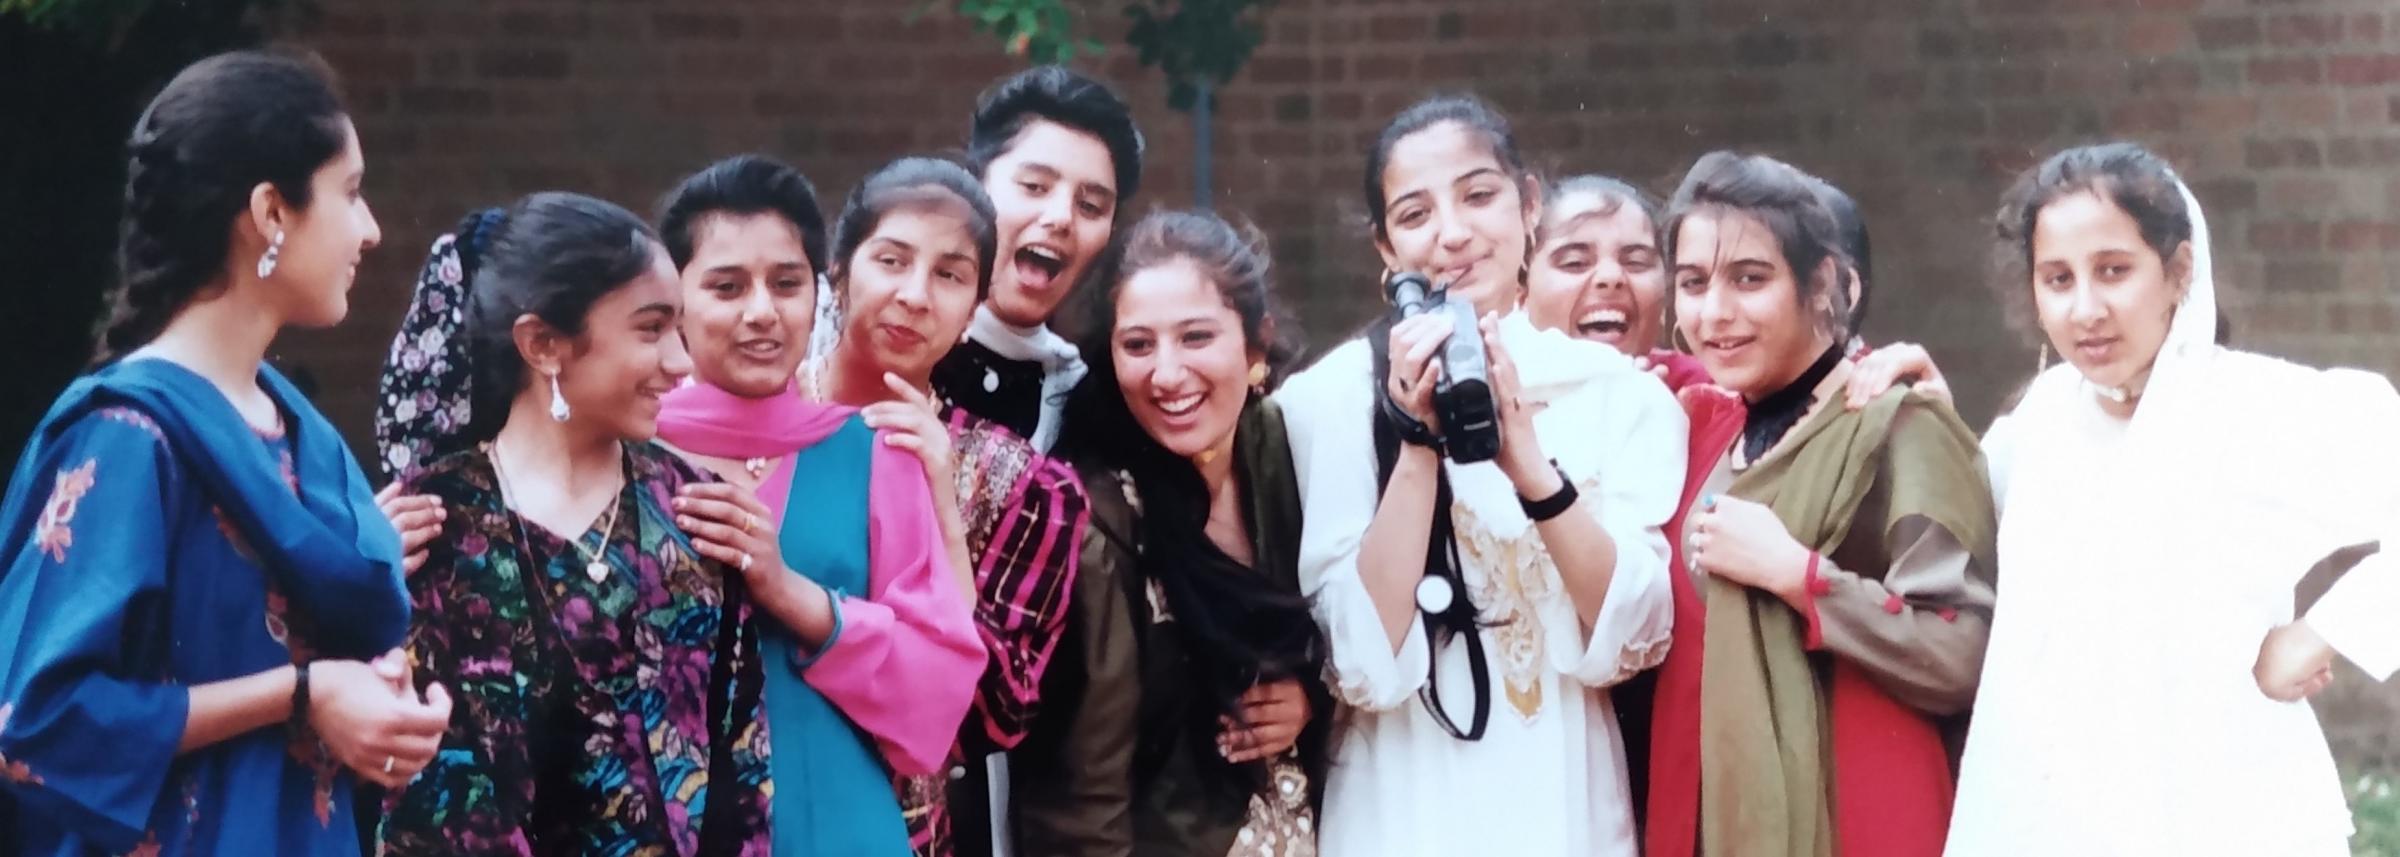 A culture day was held in July 1985, when pupils studied the dress, history and food of different cultures. Anila Parveen is pictured making a video of her friends during the day